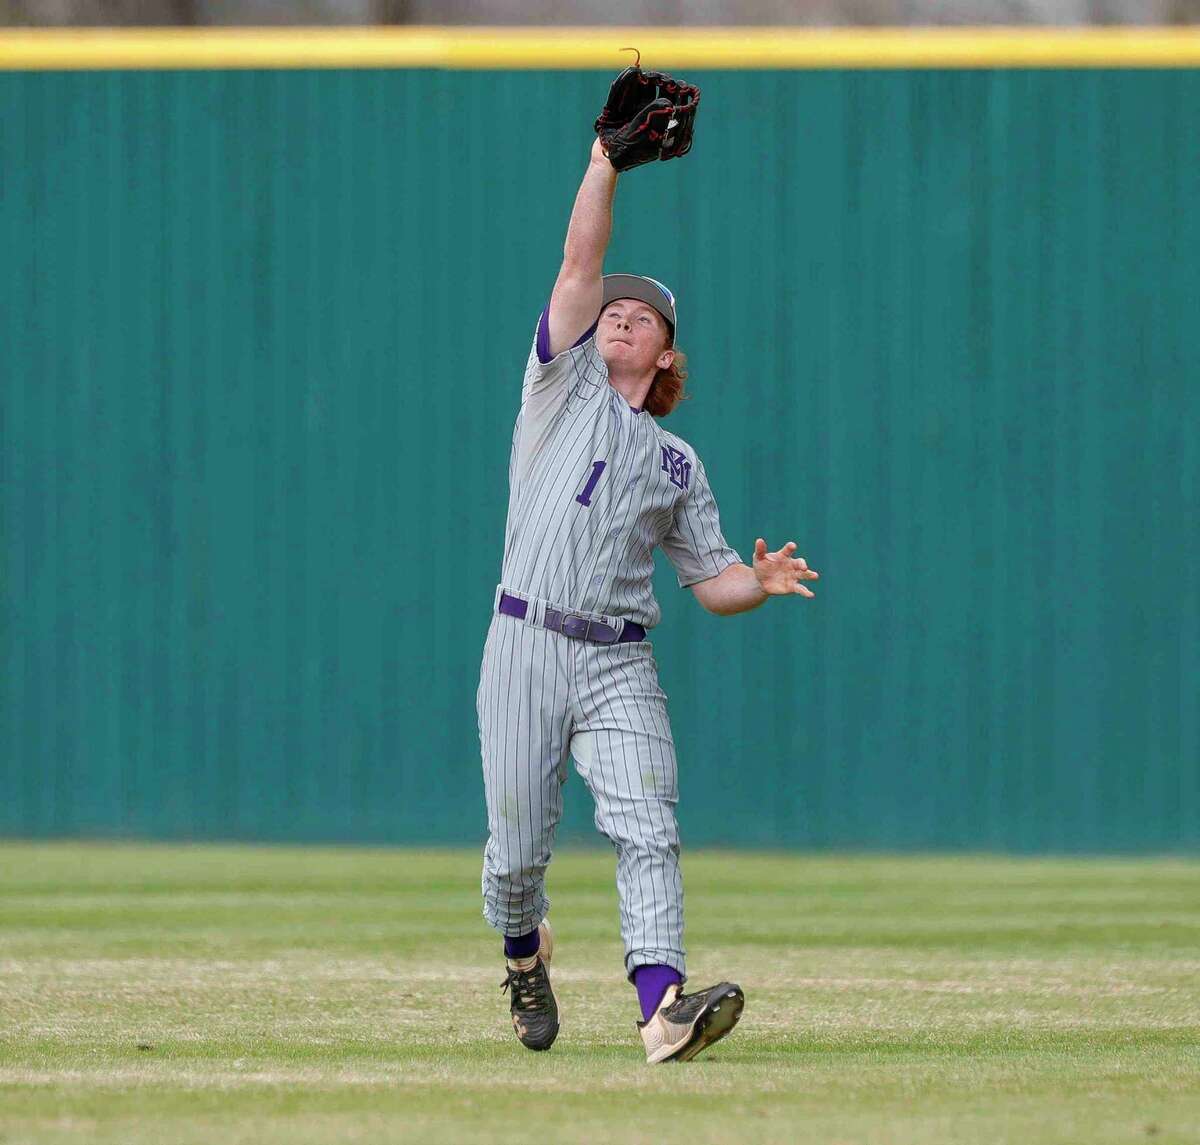 Montgomery right fielder Tyler Pelton (1) catches a fly ball in the third inning of a high school baseball game during the Brenham/Montgomery Tournament, Friday, March 4, 2022, in Montgomery.